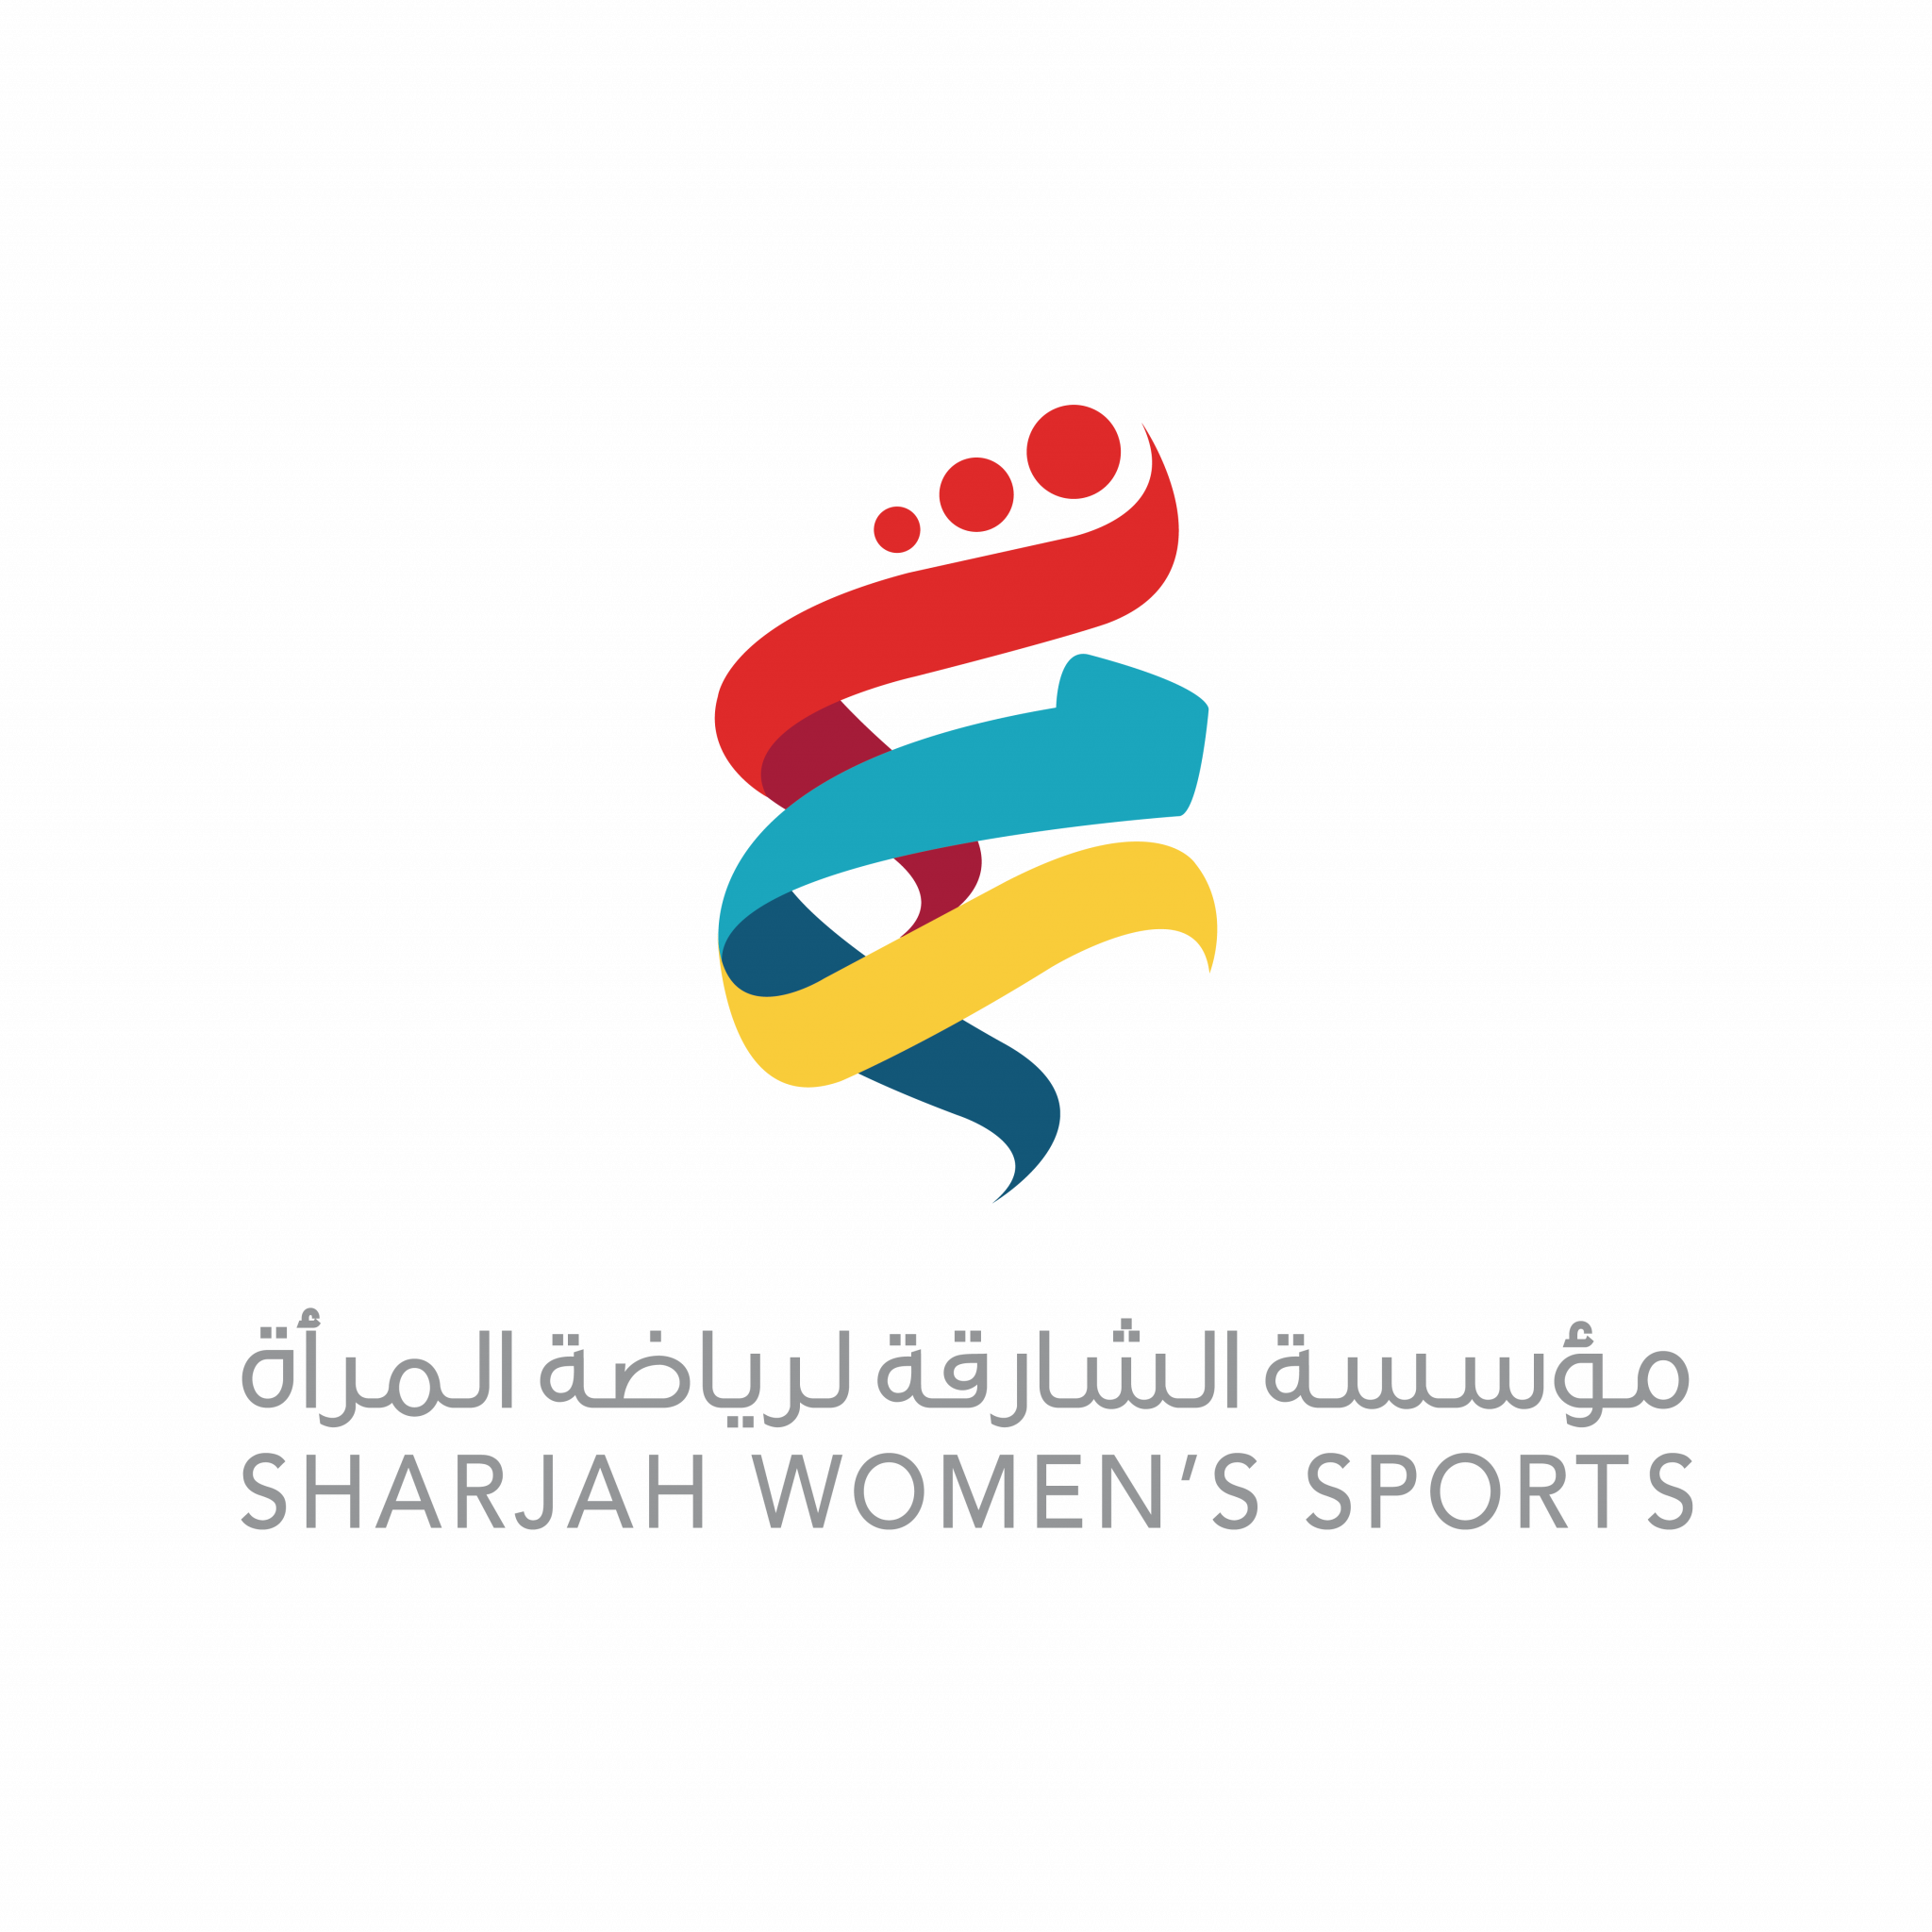 Sharjah Women's Sports Foundation at the ACAPS conference in Paris